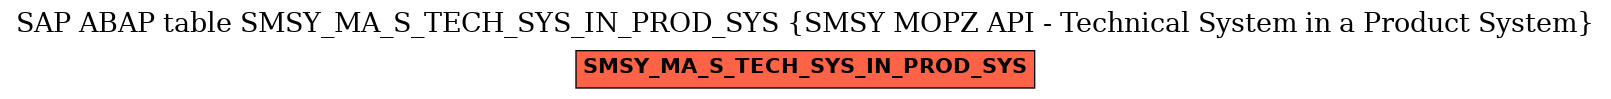 E-R Diagram for table SMSY_MA_S_TECH_SYS_IN_PROD_SYS (SMSY MOPZ API - Technical System in a Product System)